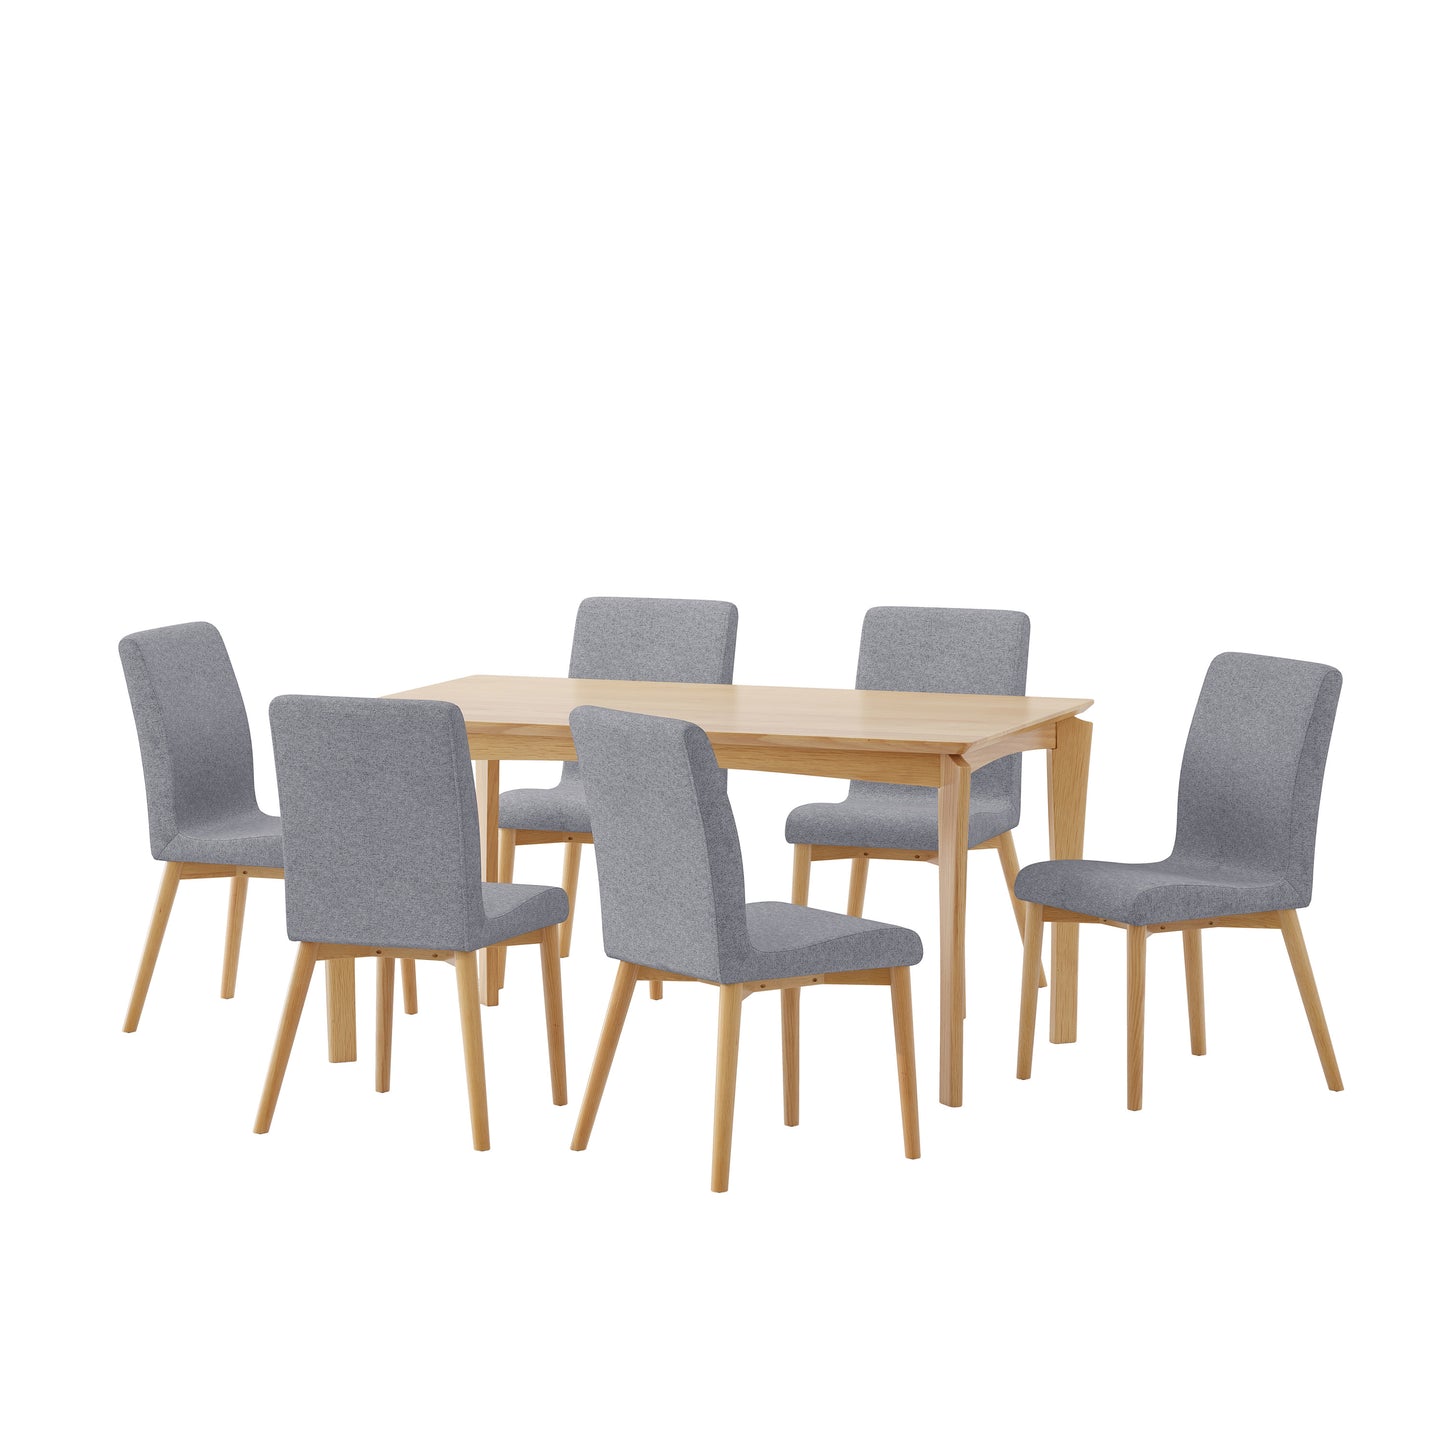 Amesbury Wood and Fabric 7 Piece Dining Set